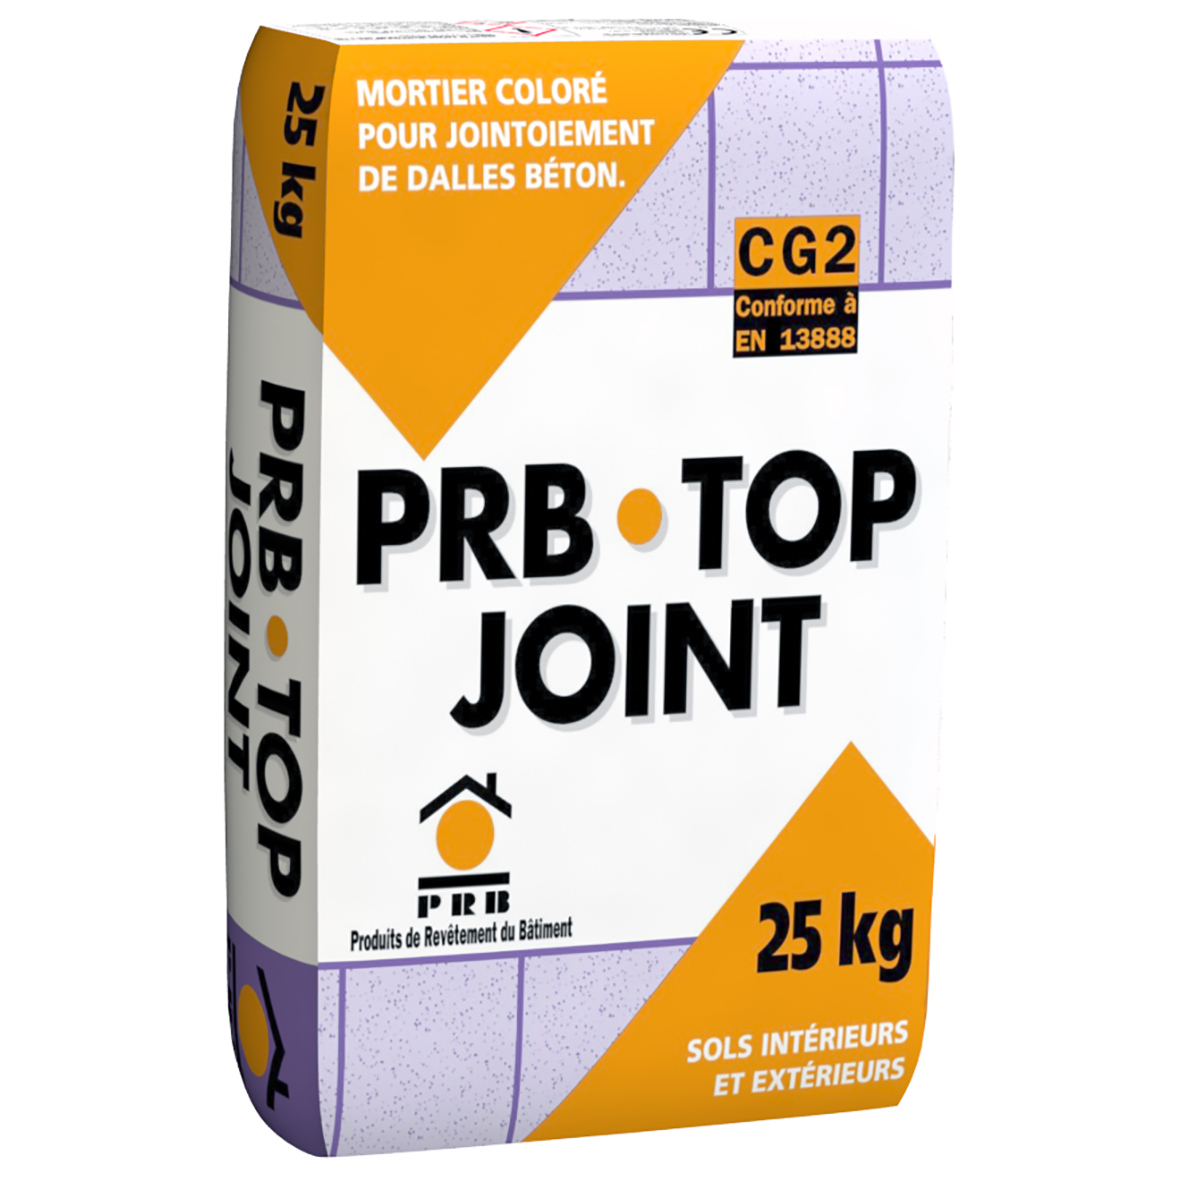 joint-dallage-prb-top-joint-25kg-sac-gris-fonce-0